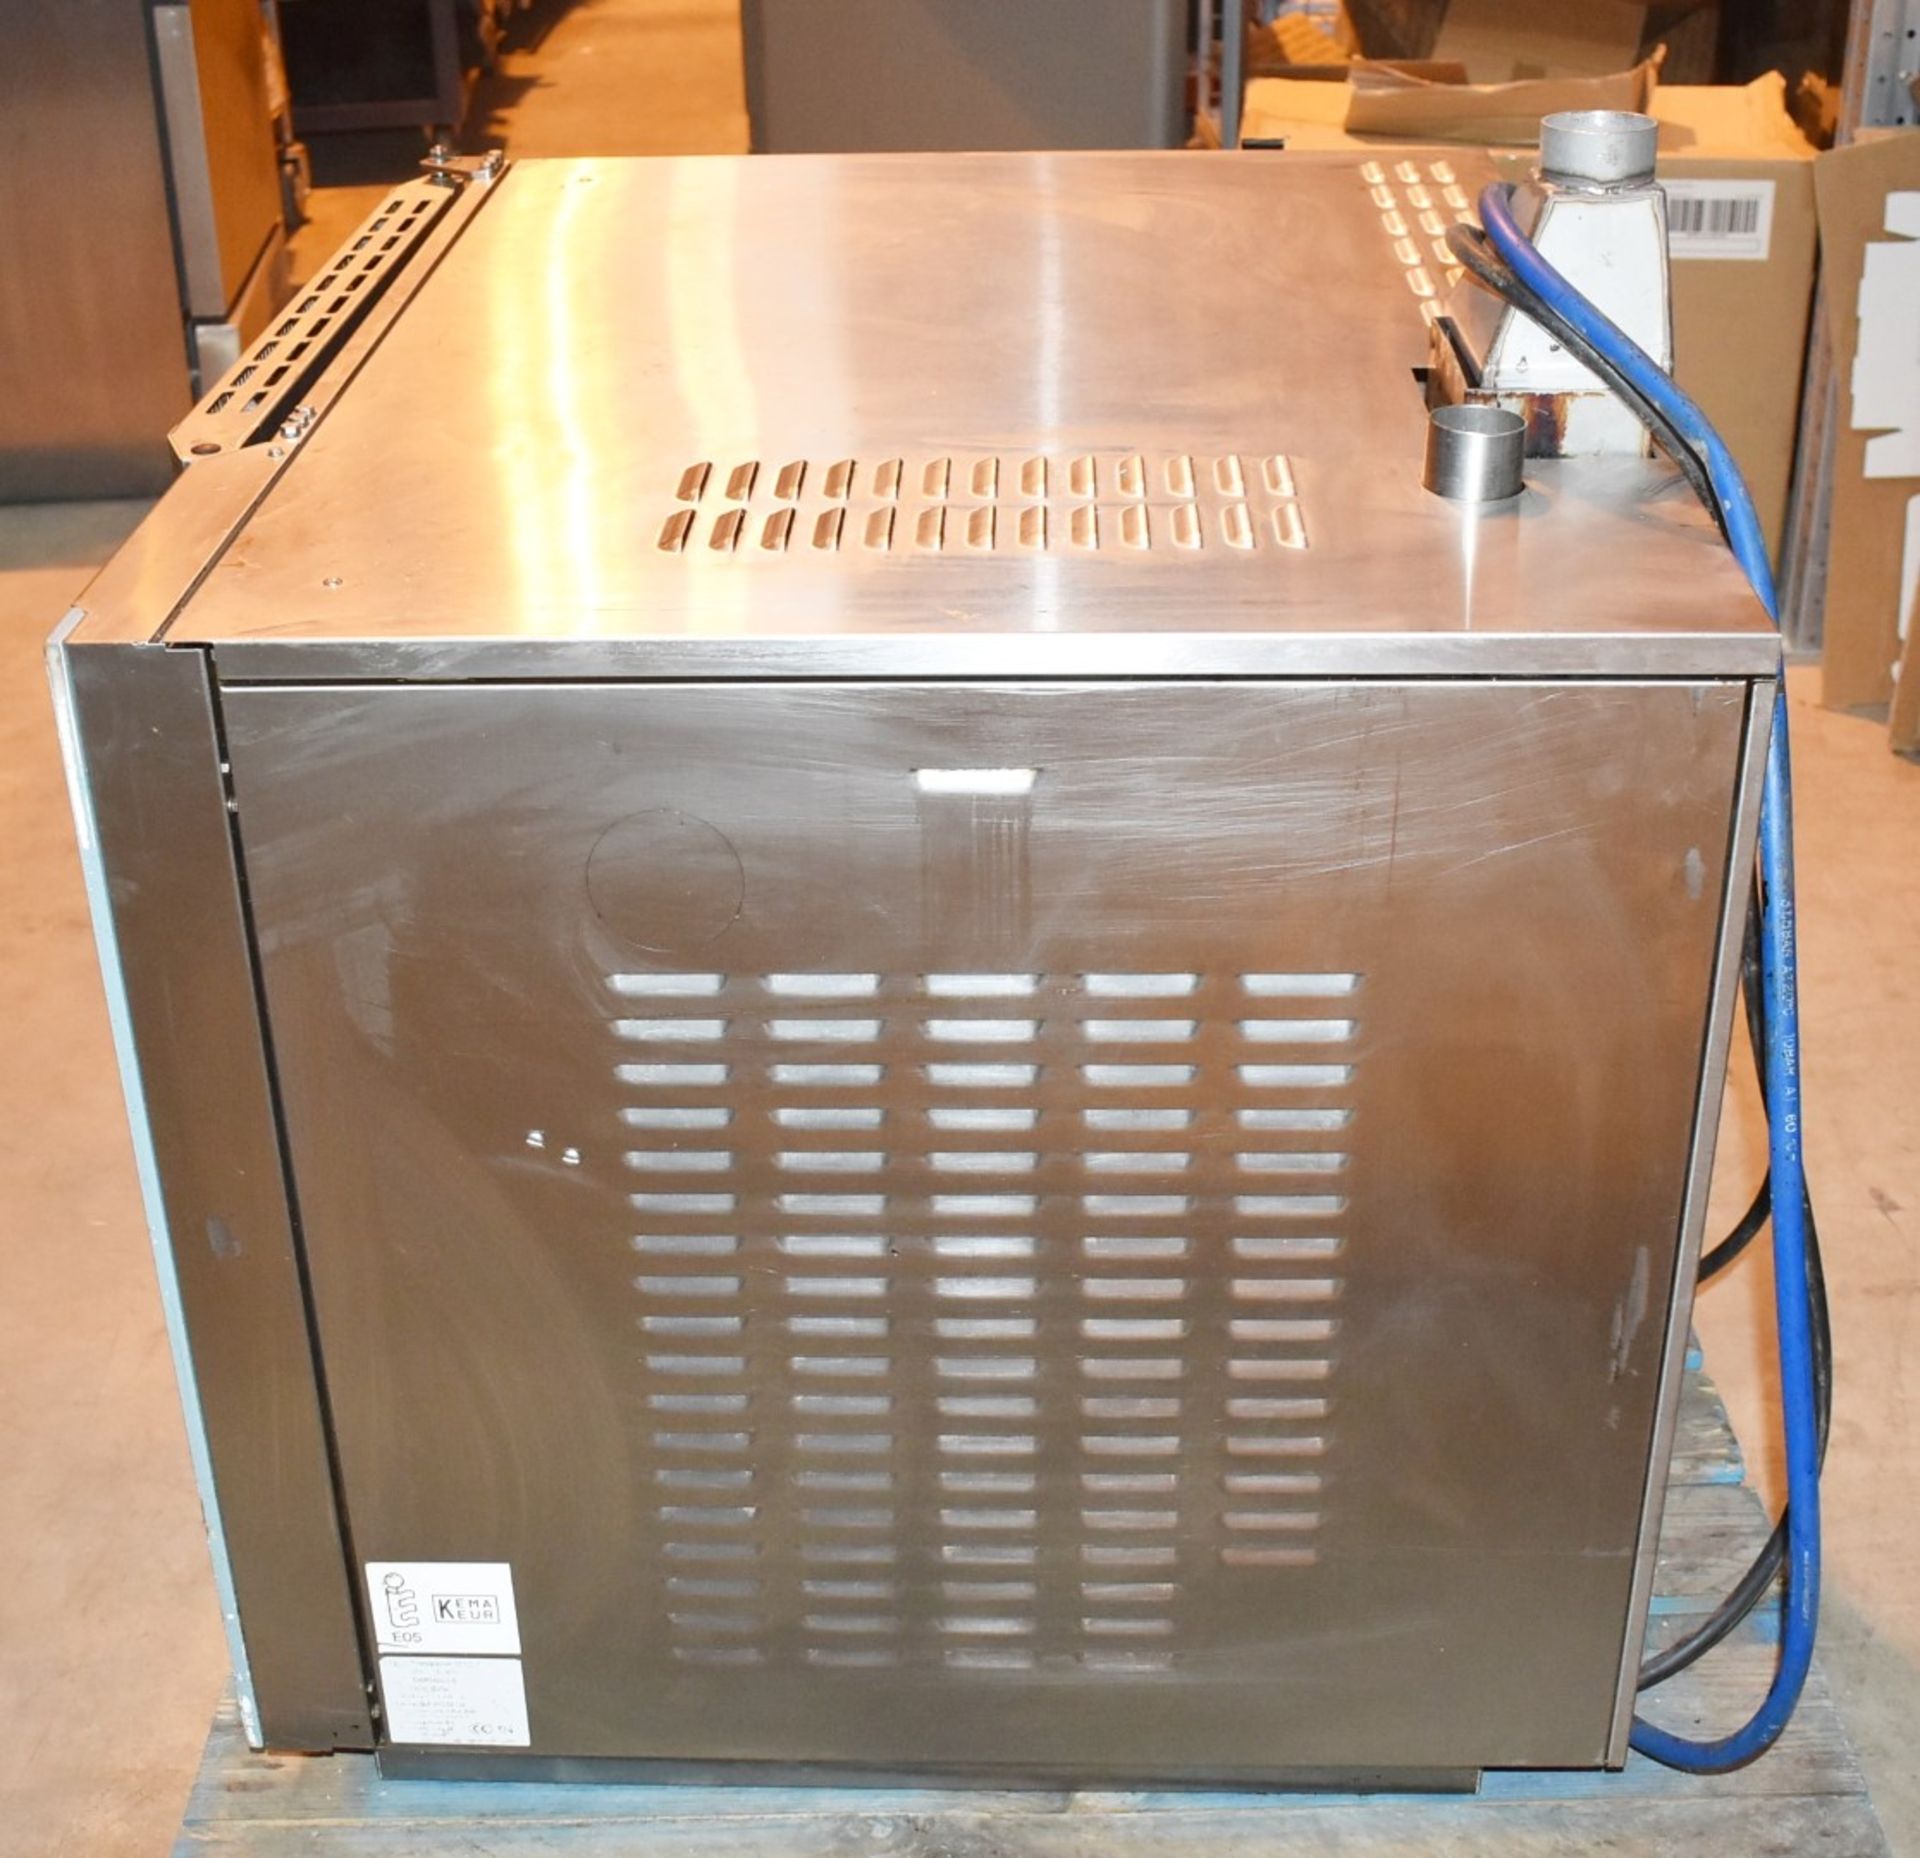 1 x Leventi Combimat mk3.1 Mastermind 6 Grid Combi Steam Oven - 3 Phase - Recently Removed From a - Image 8 of 11